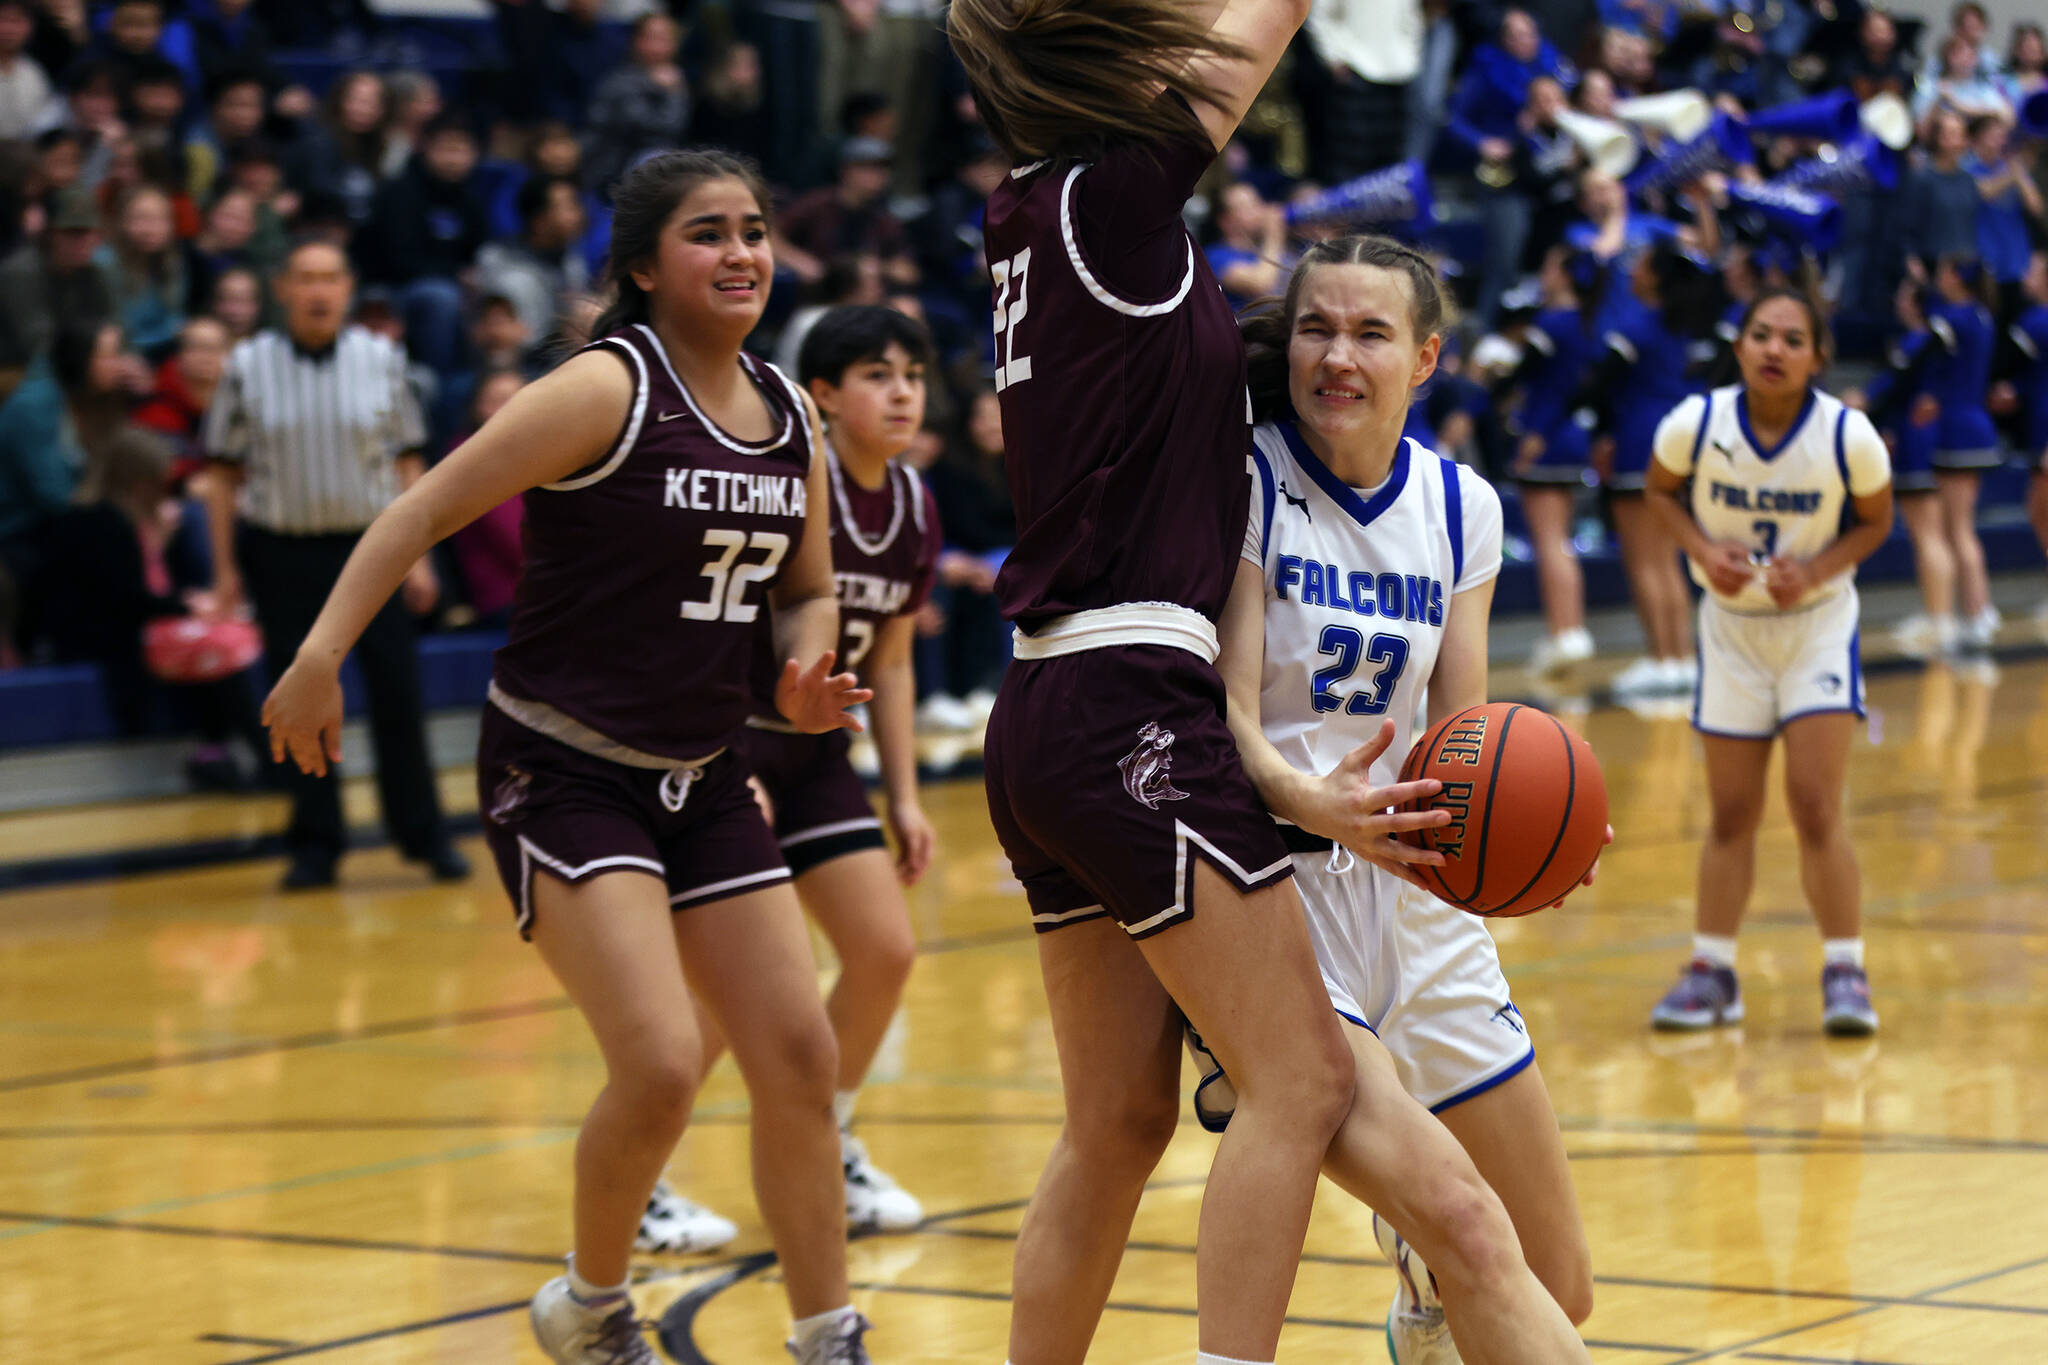 TMHS sophomore Cailynn Baxter makes contact with Kayhi junior Bree Johnson on her way to the hoop. Baxter led TMHS in scoring Saturday in a close 43-40 loss to the Lady Kings. (Ben Hohenstatt / Juneau Empire)